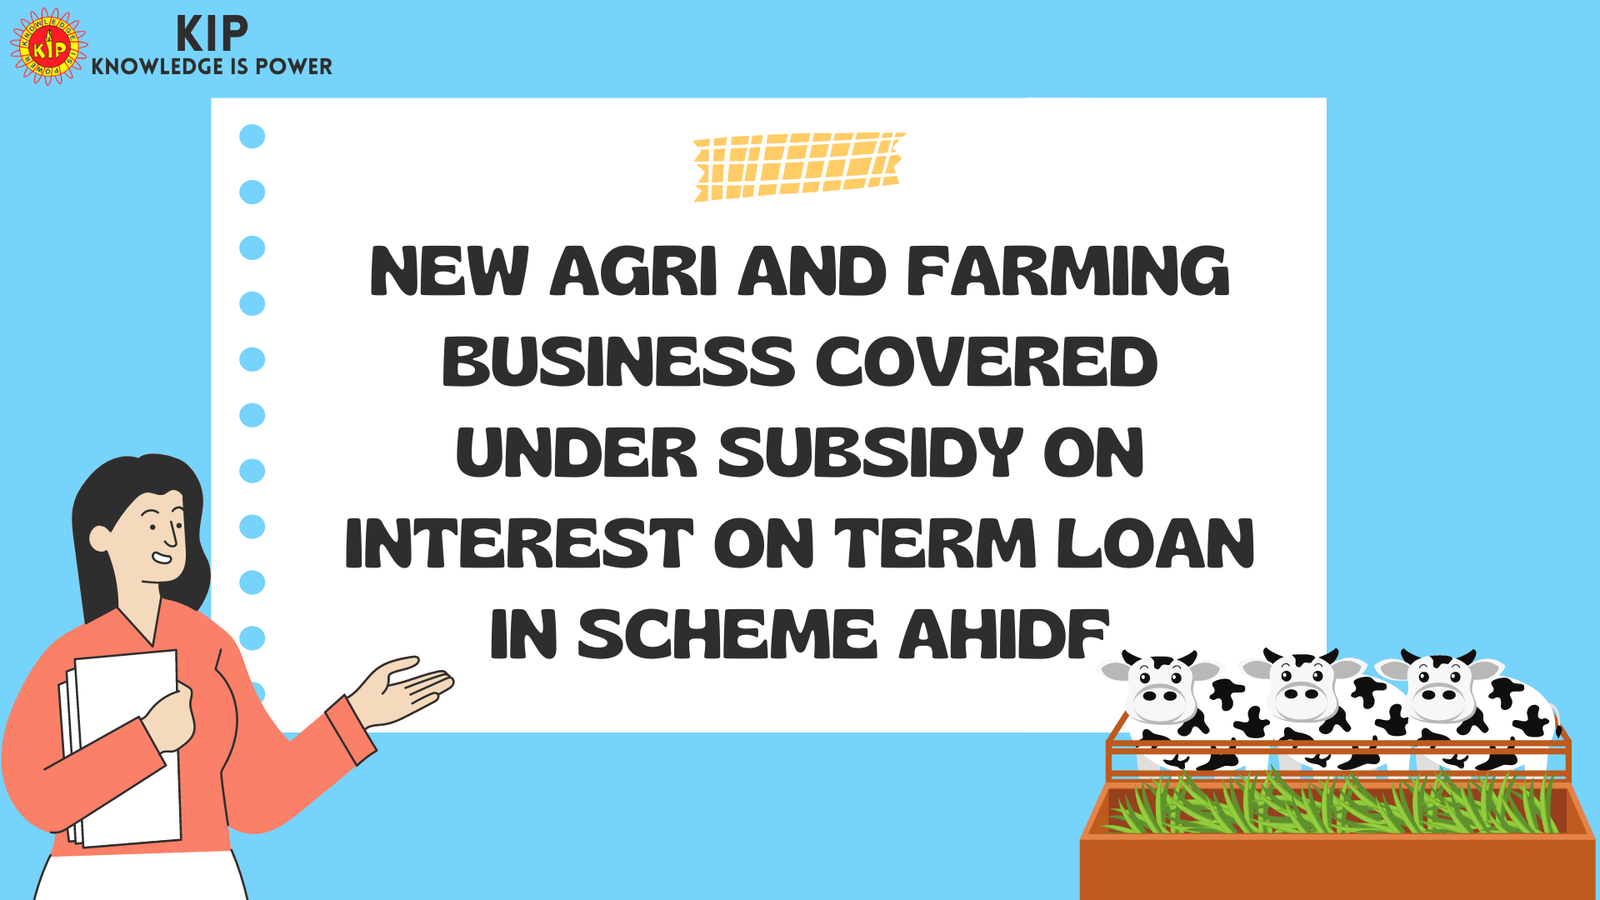 New Agri and Farming Business covered under Subsidy on Interest on Term Loan in Scheme AHIDF